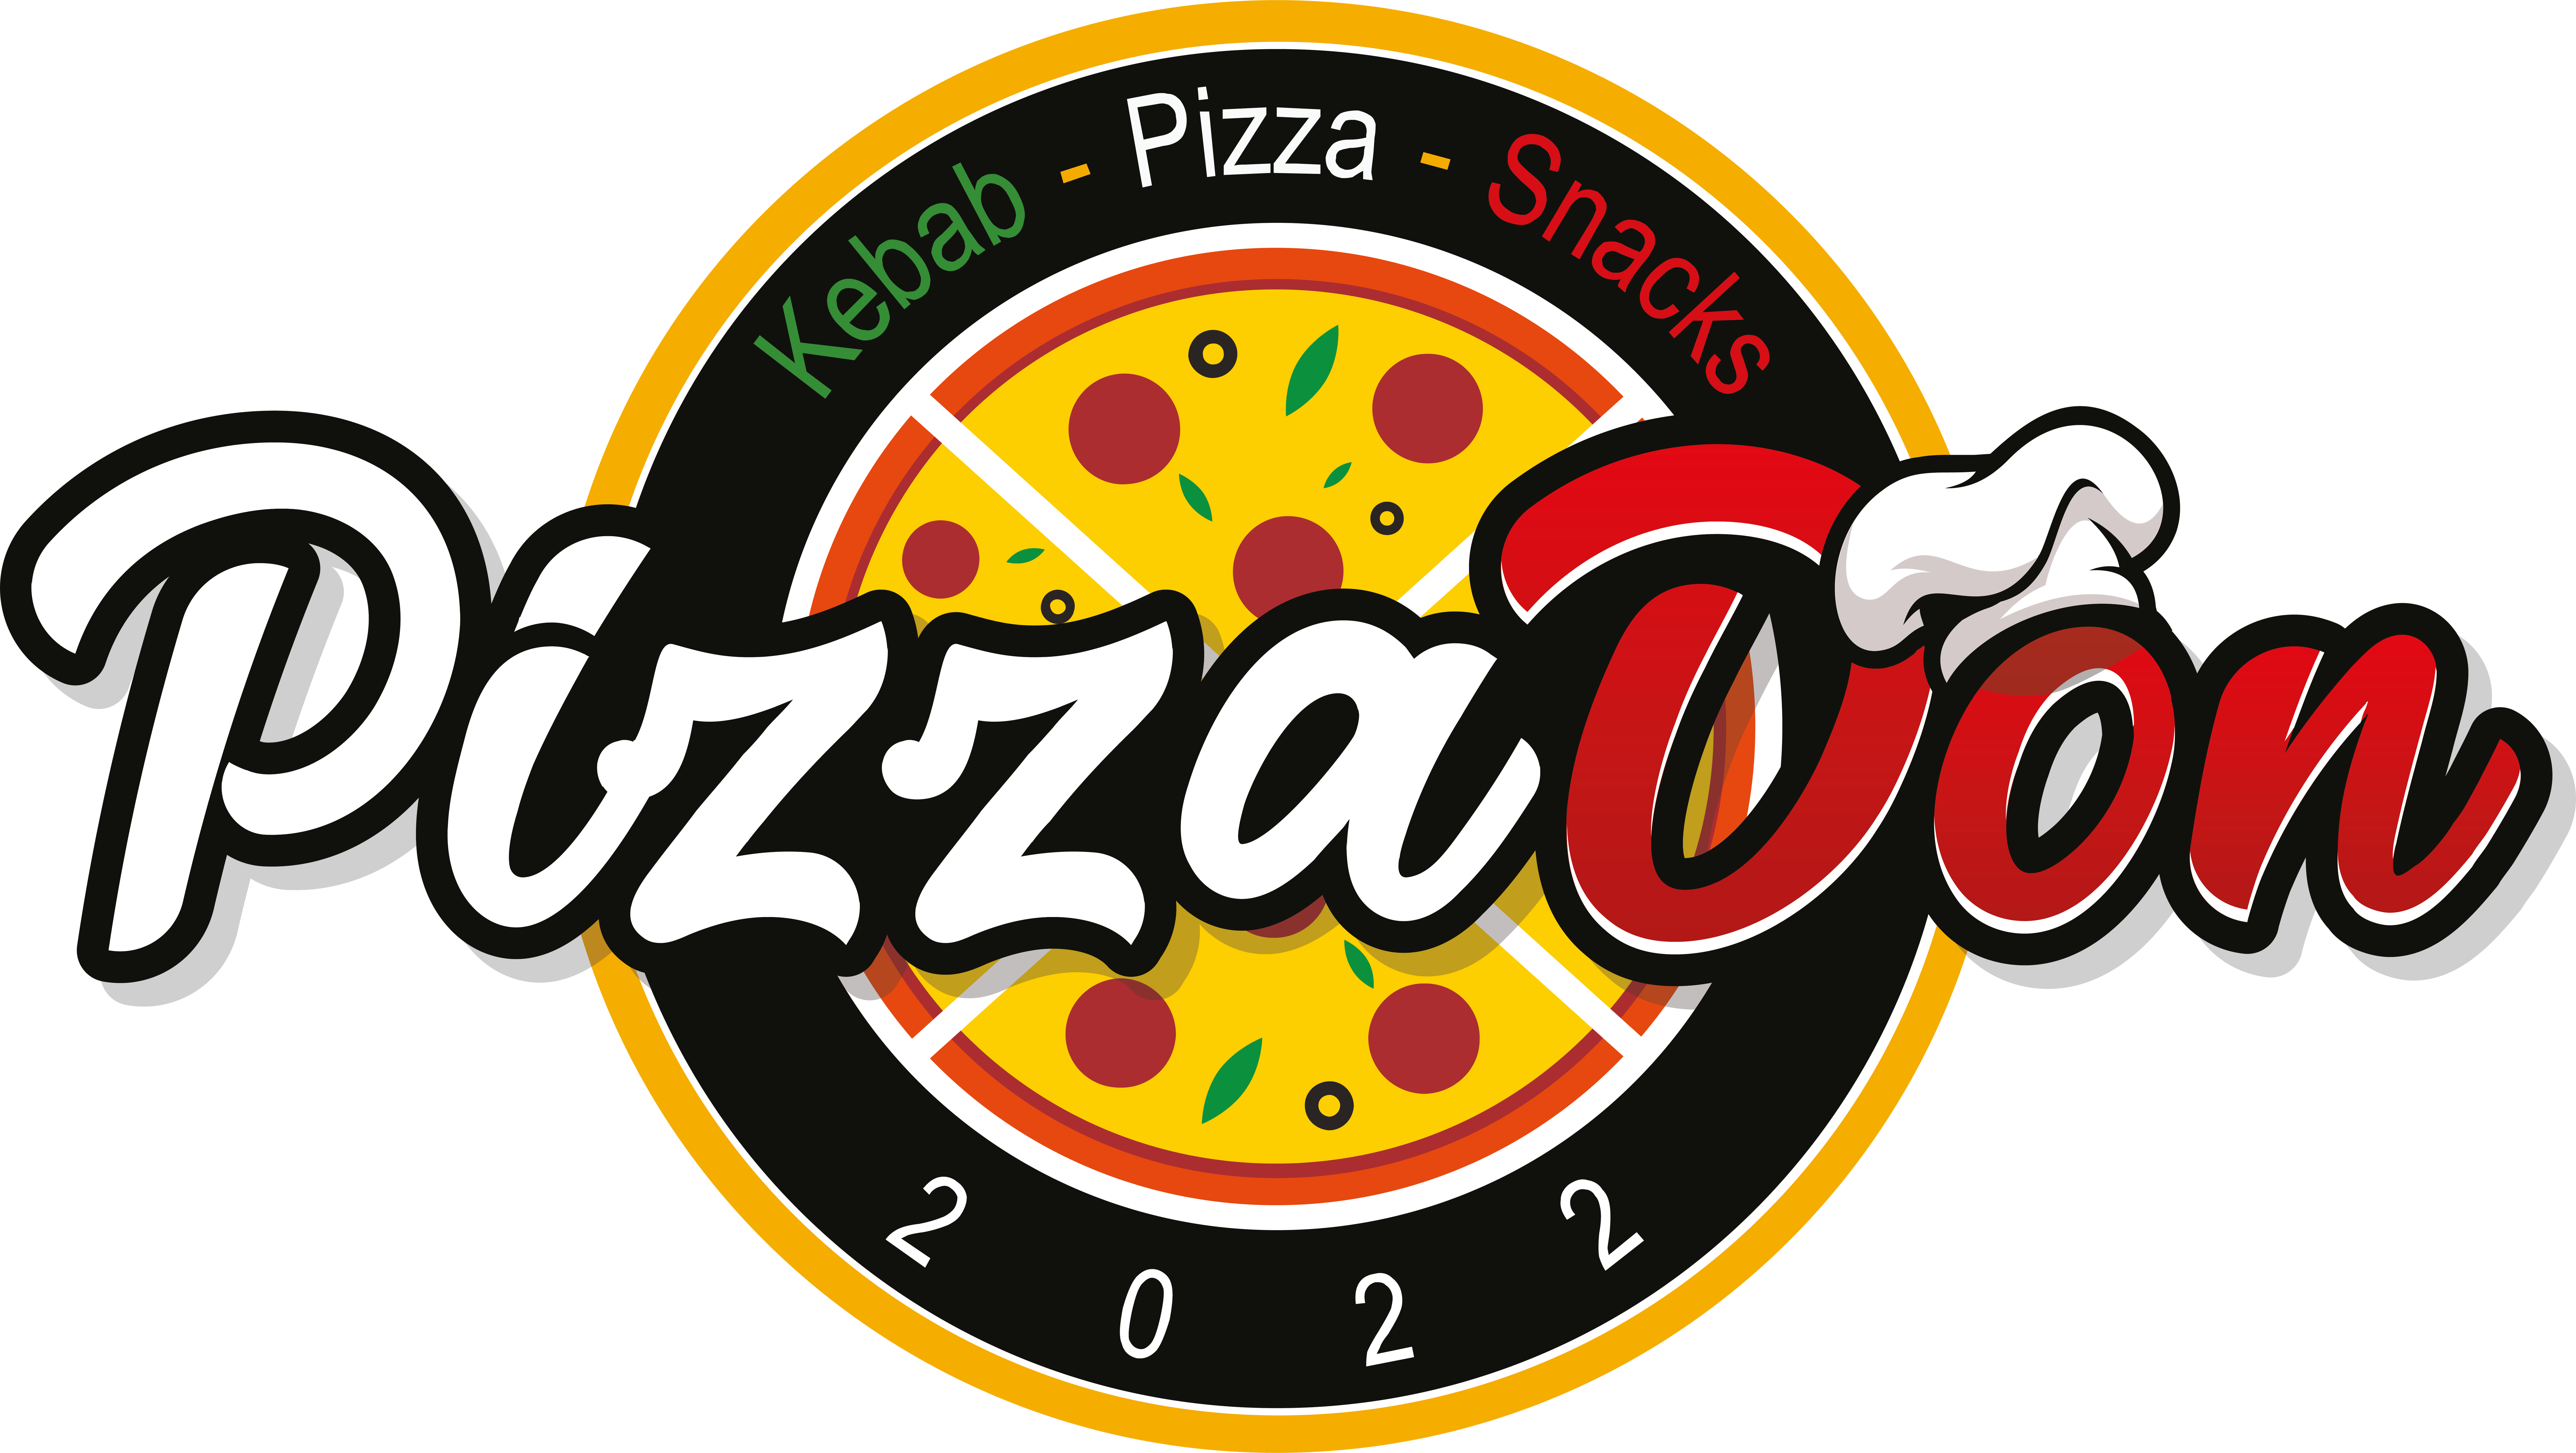 Pizza Don Footer logo